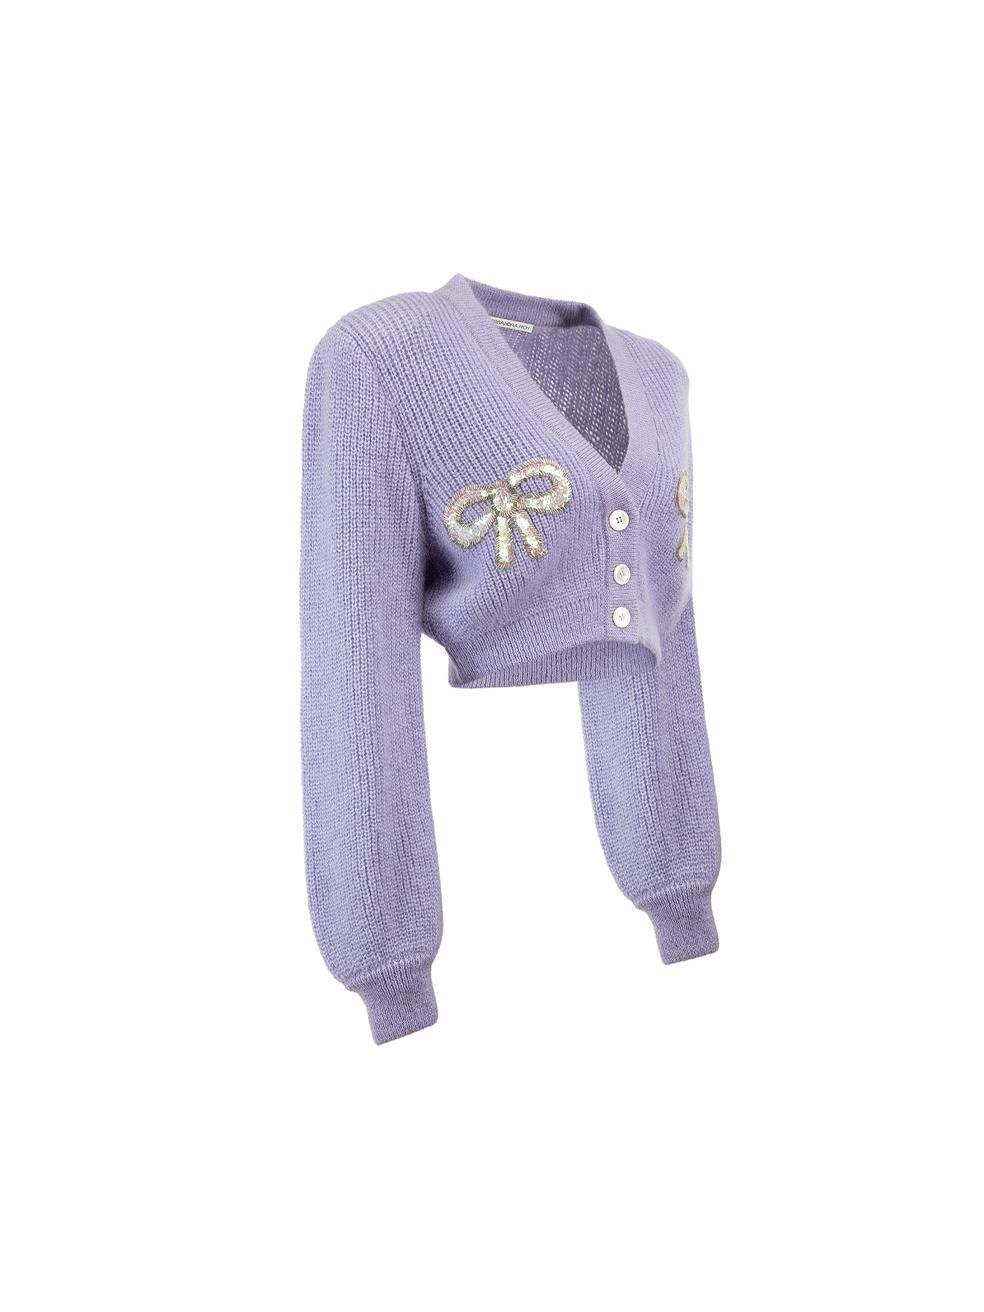 CONDITION is Never worn, with tags. No visible wear to cardigan is evident on this new Alessandra Rich designer resale item. 



Details


Lilac

Wool

Cropped cardigan

Knitted

Front button up closure

Sequinned bow accent

Shoulder